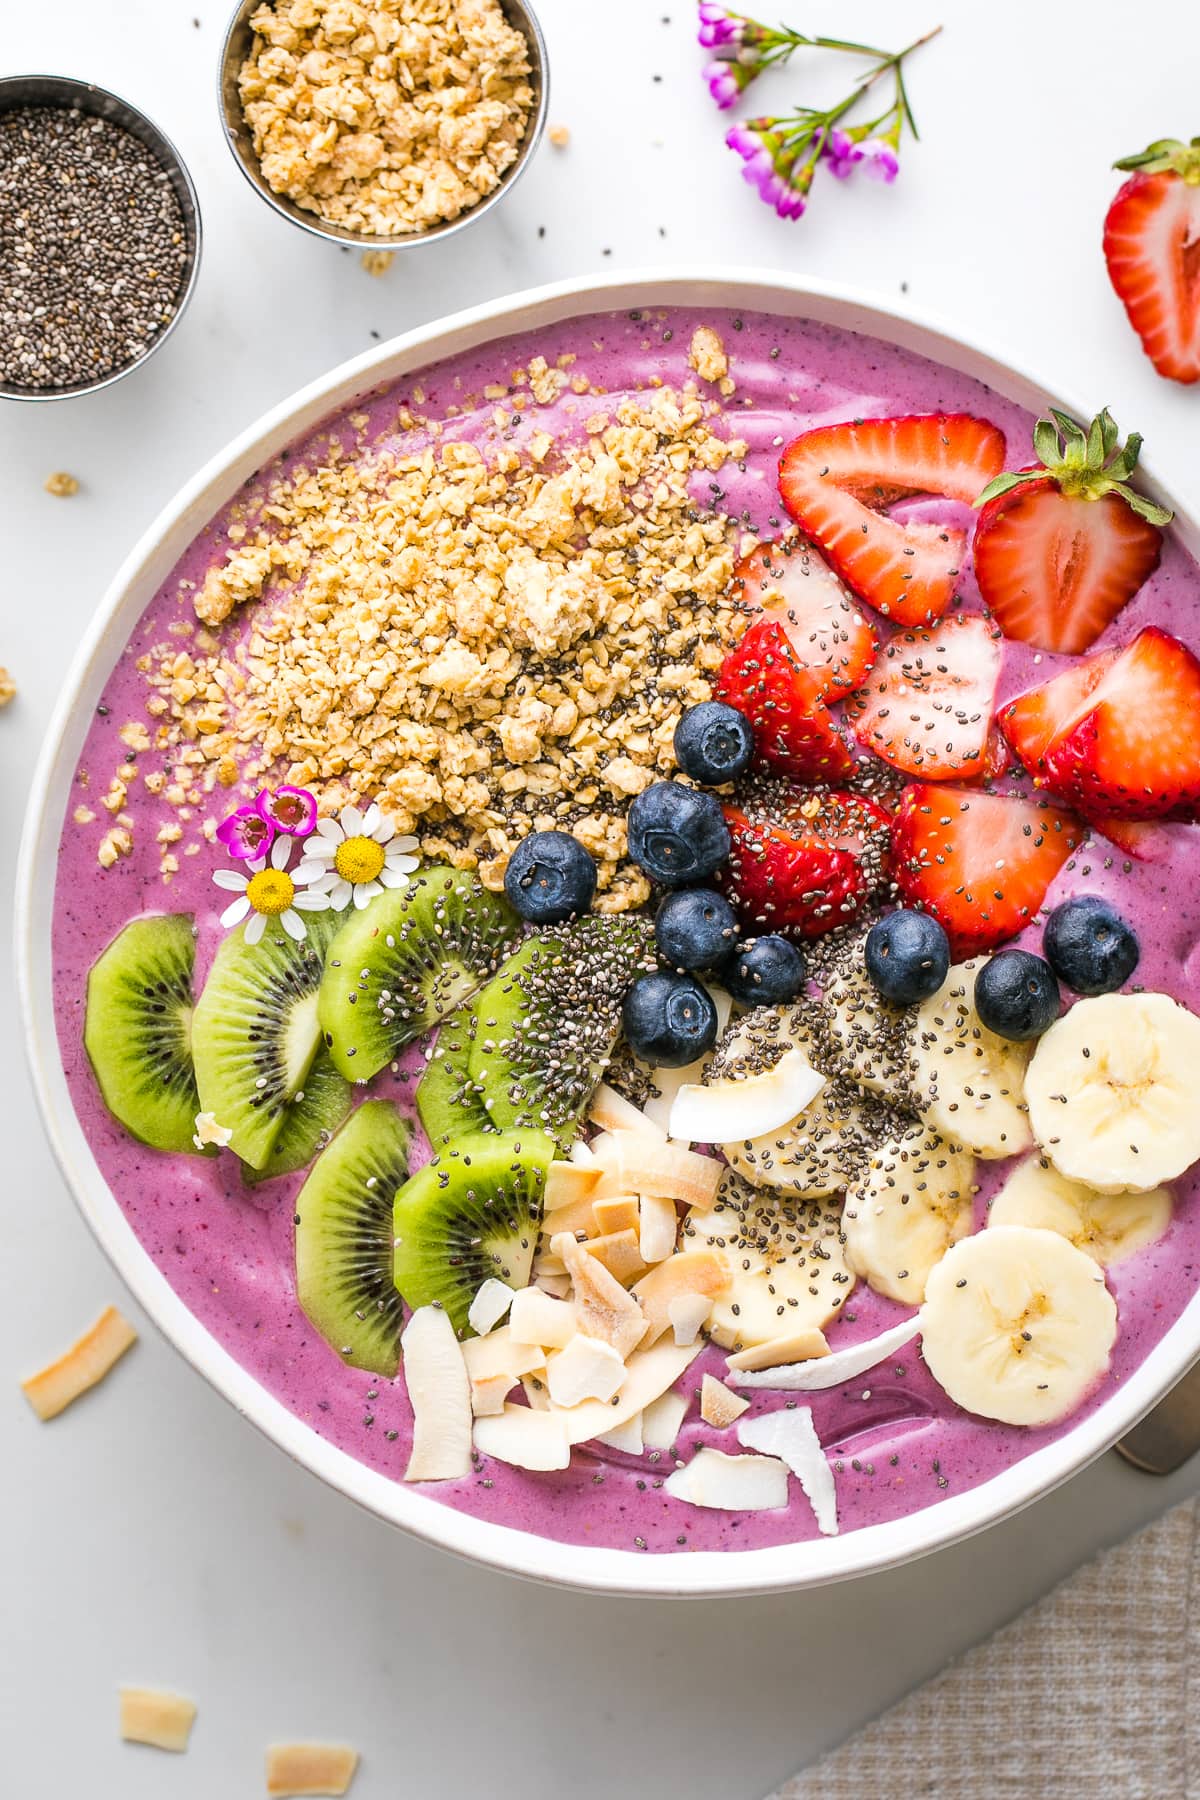 Tips for Delicious Smoothie Bowl Creations